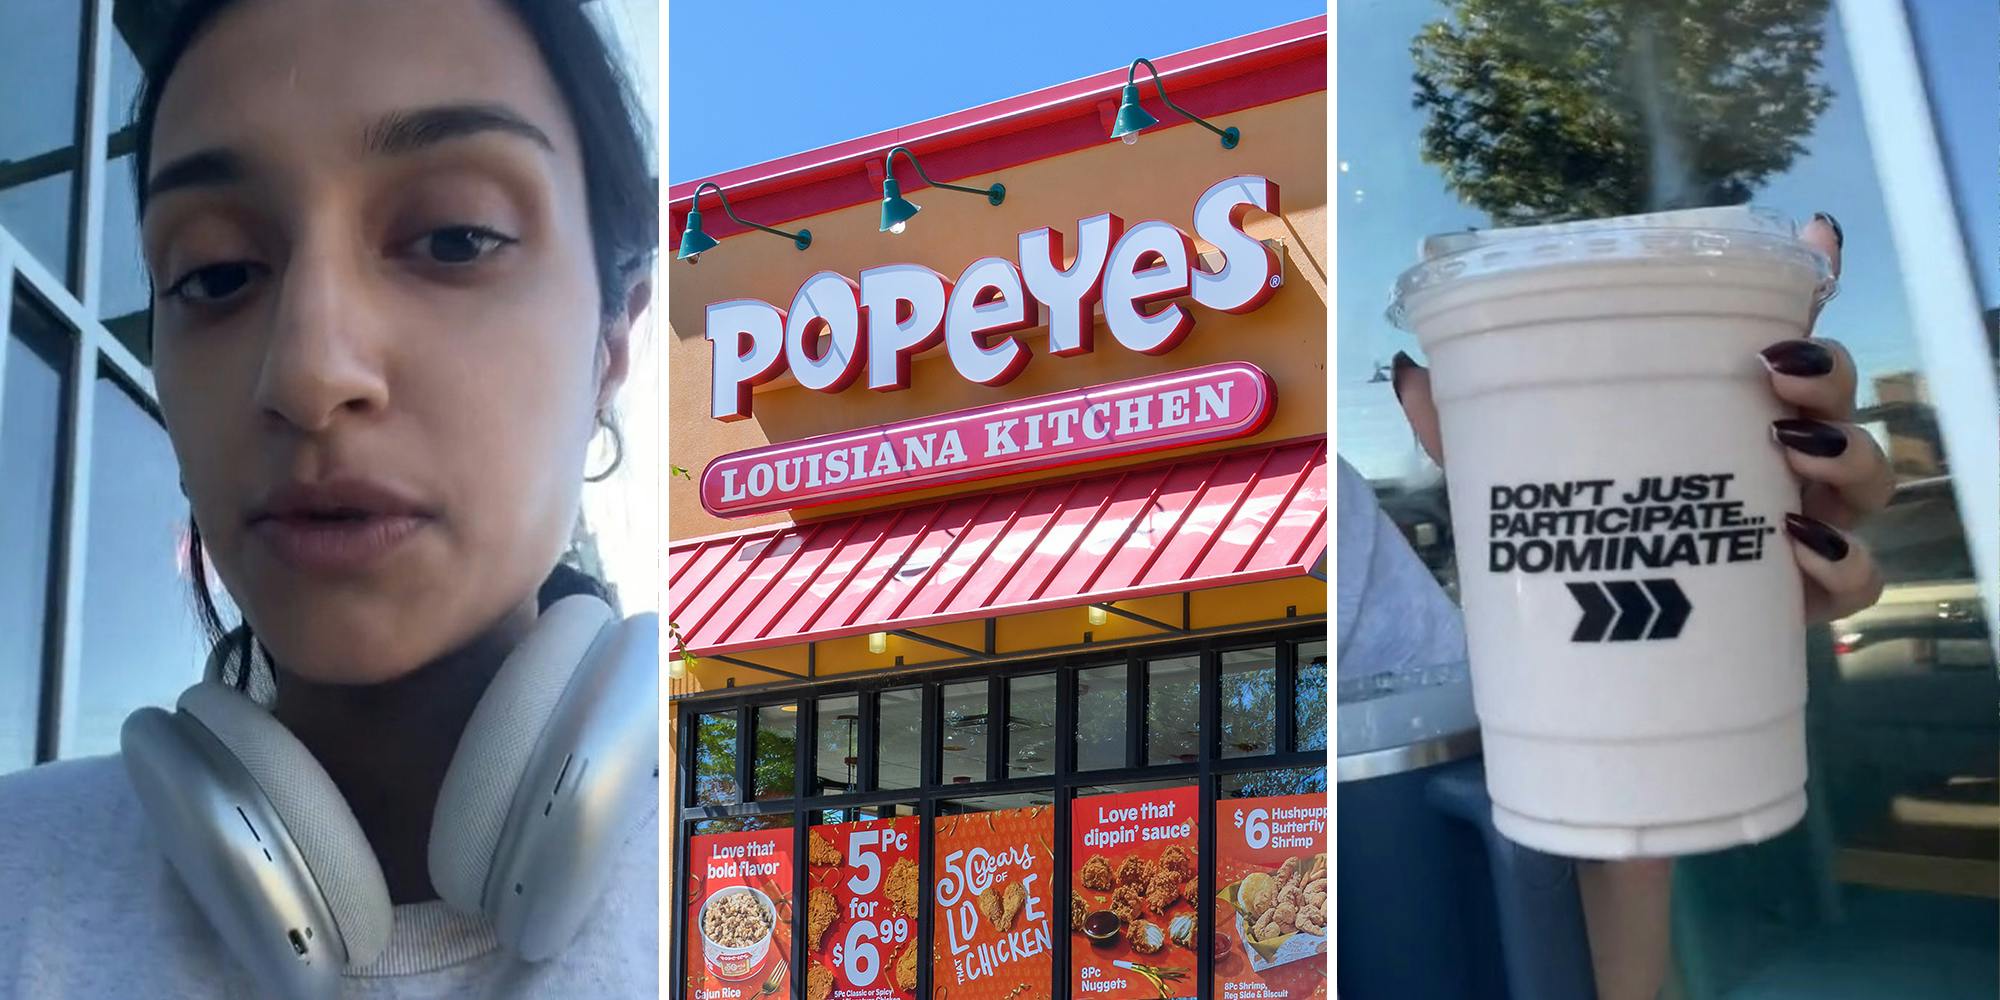 Does Popeyes really have $2 protein shakes